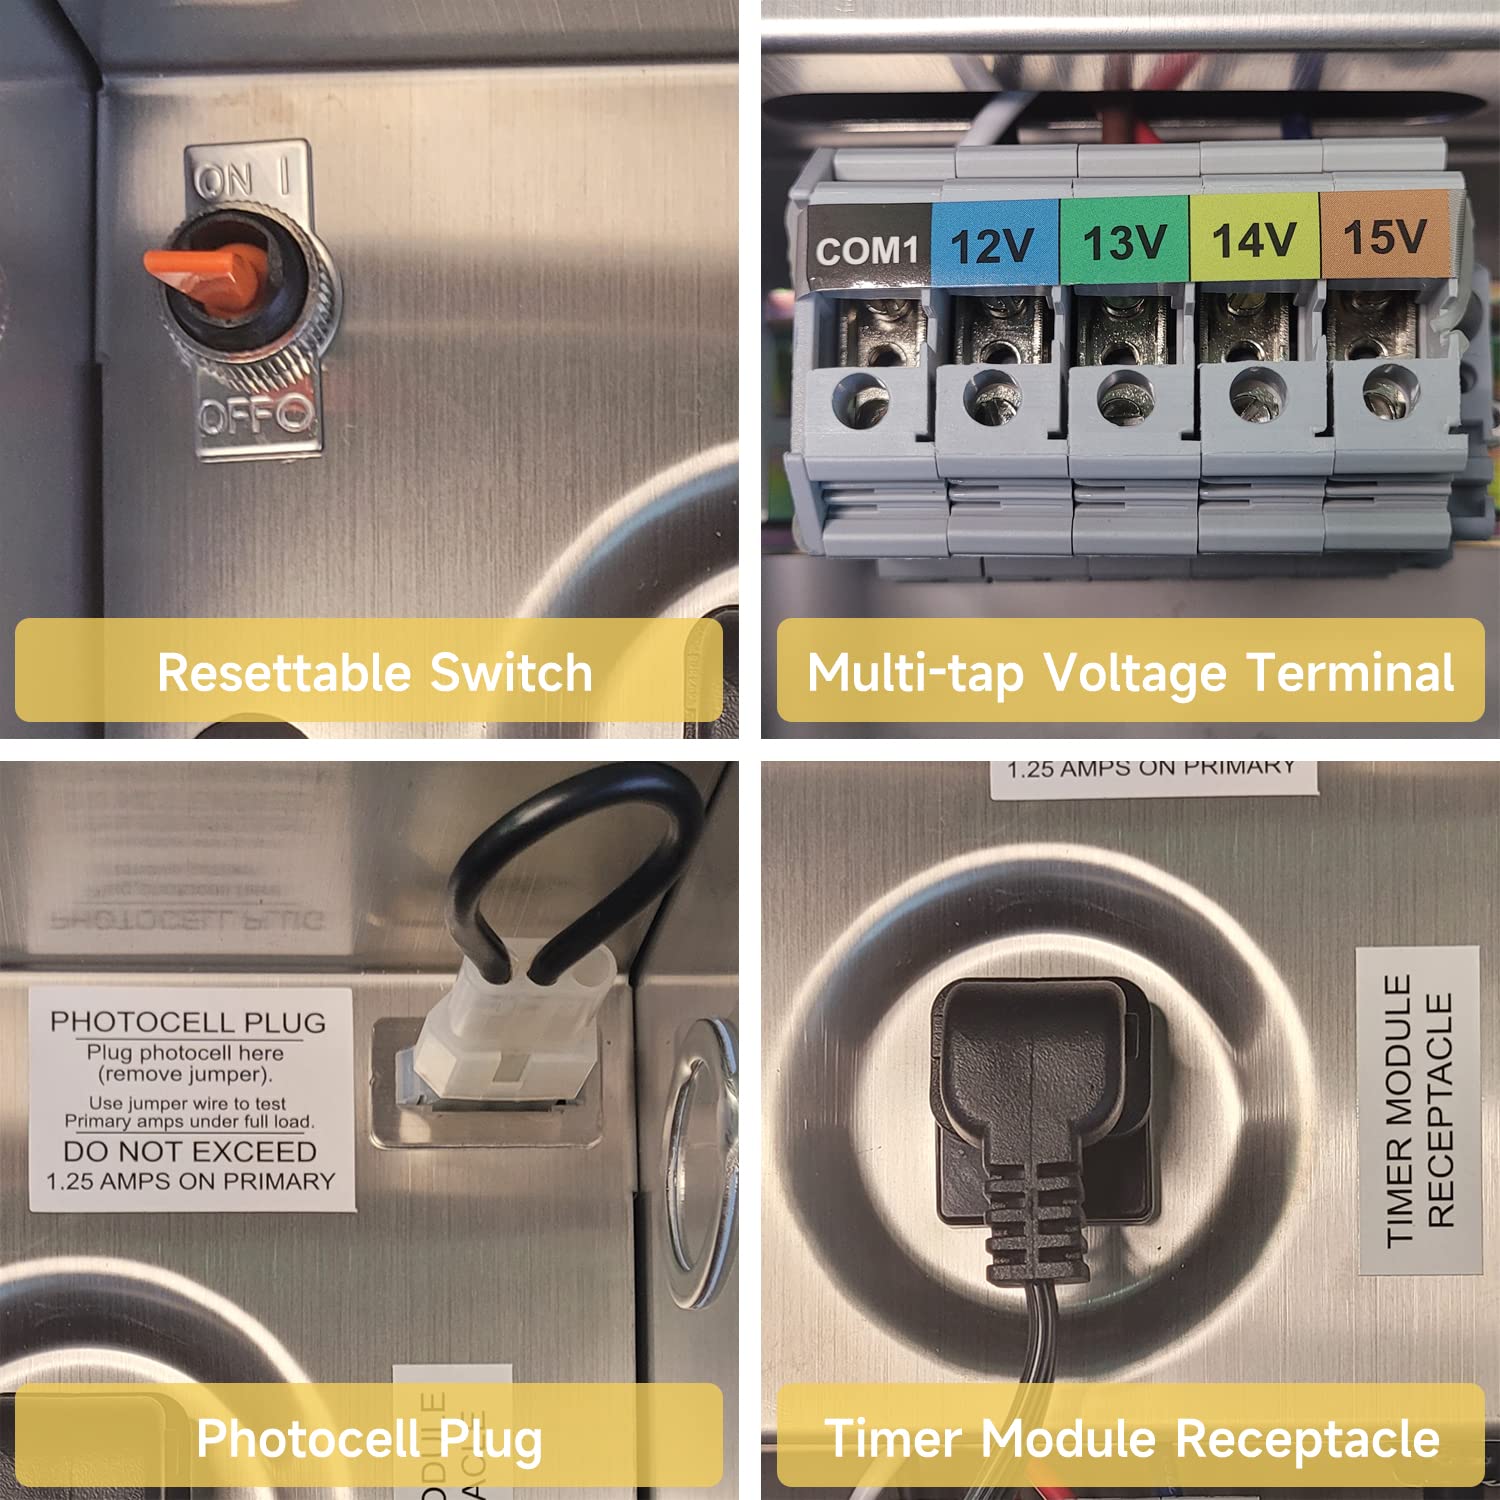 Features of 150W Multi-Tap Low Voltage Transformer: resettable switch, multi-tap voltage terminal (COM1, 12V, 13V, 14V, 15V), photocell plug with voltage specifications, and timer module receptacle